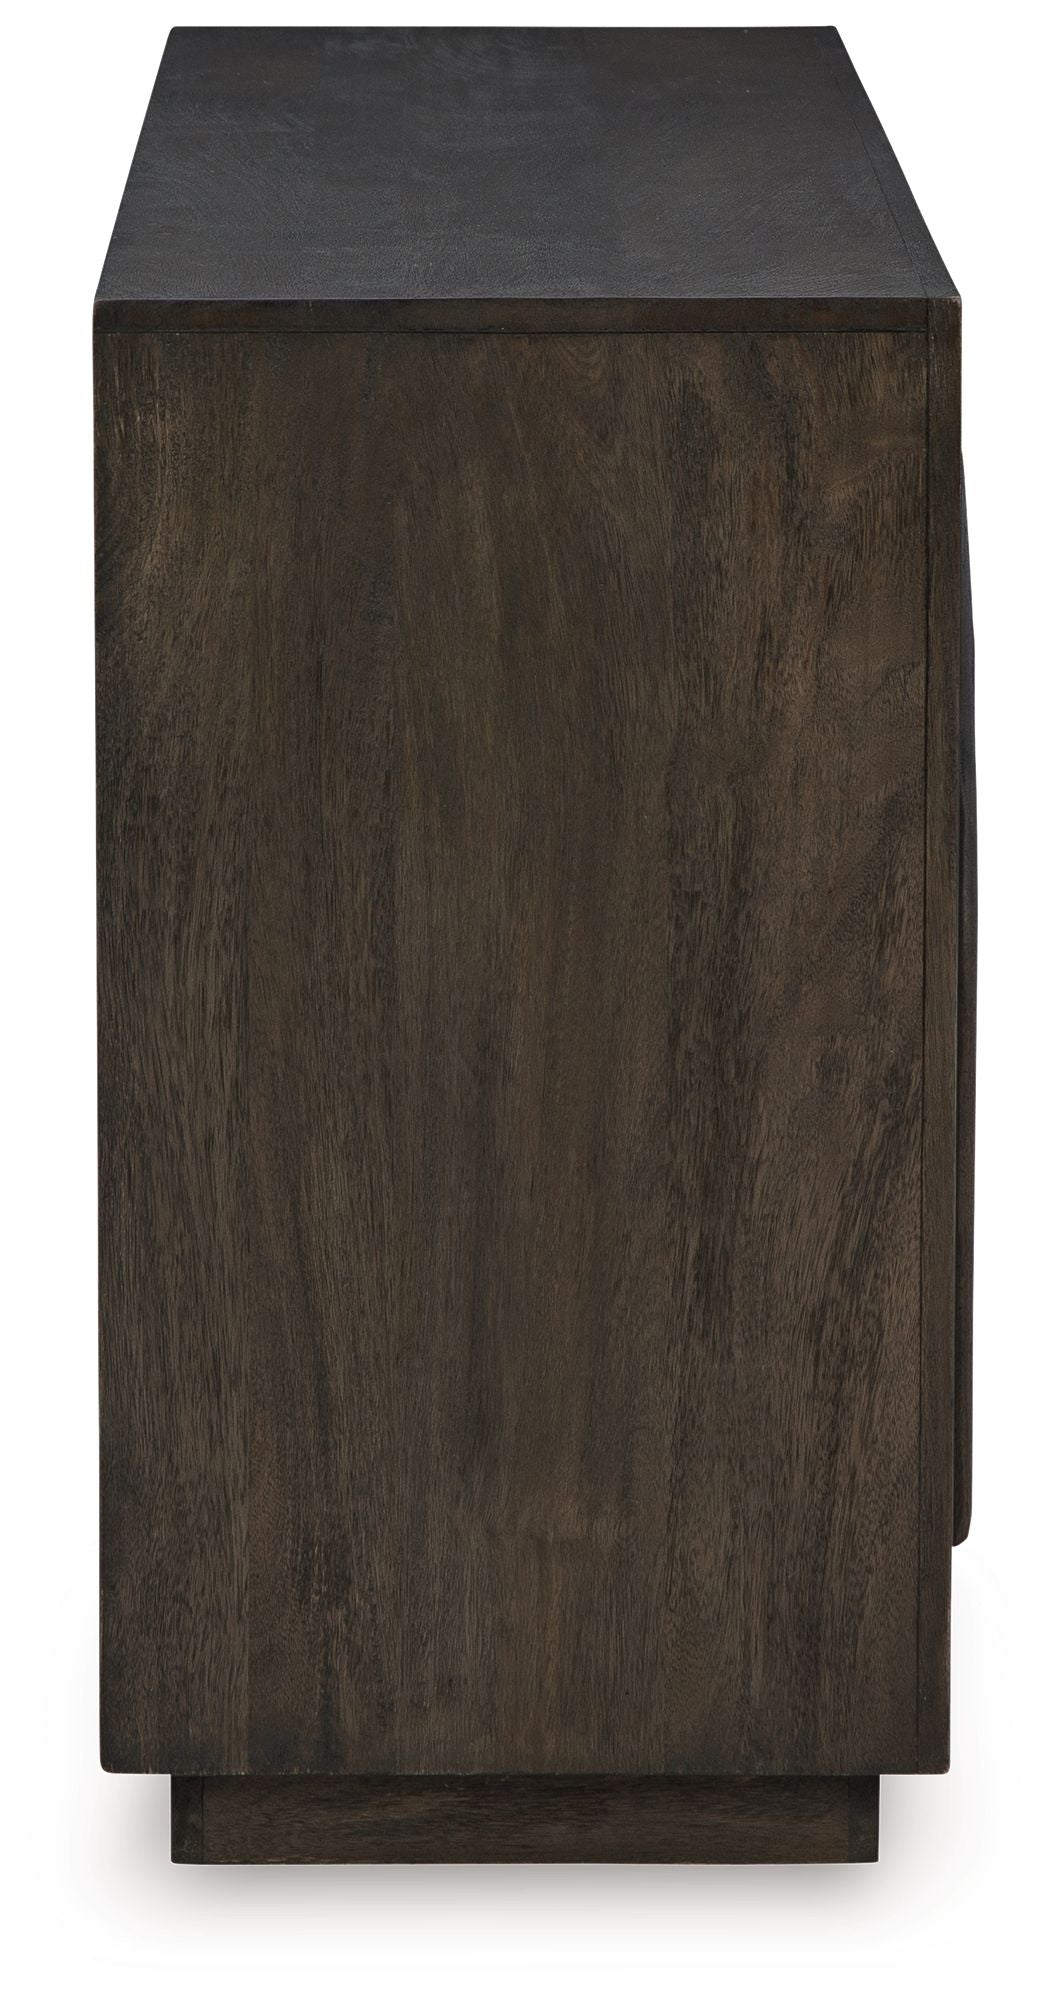 Dreley - Grayish Brown - Accent Cabinet - Tony's Home Furnishings